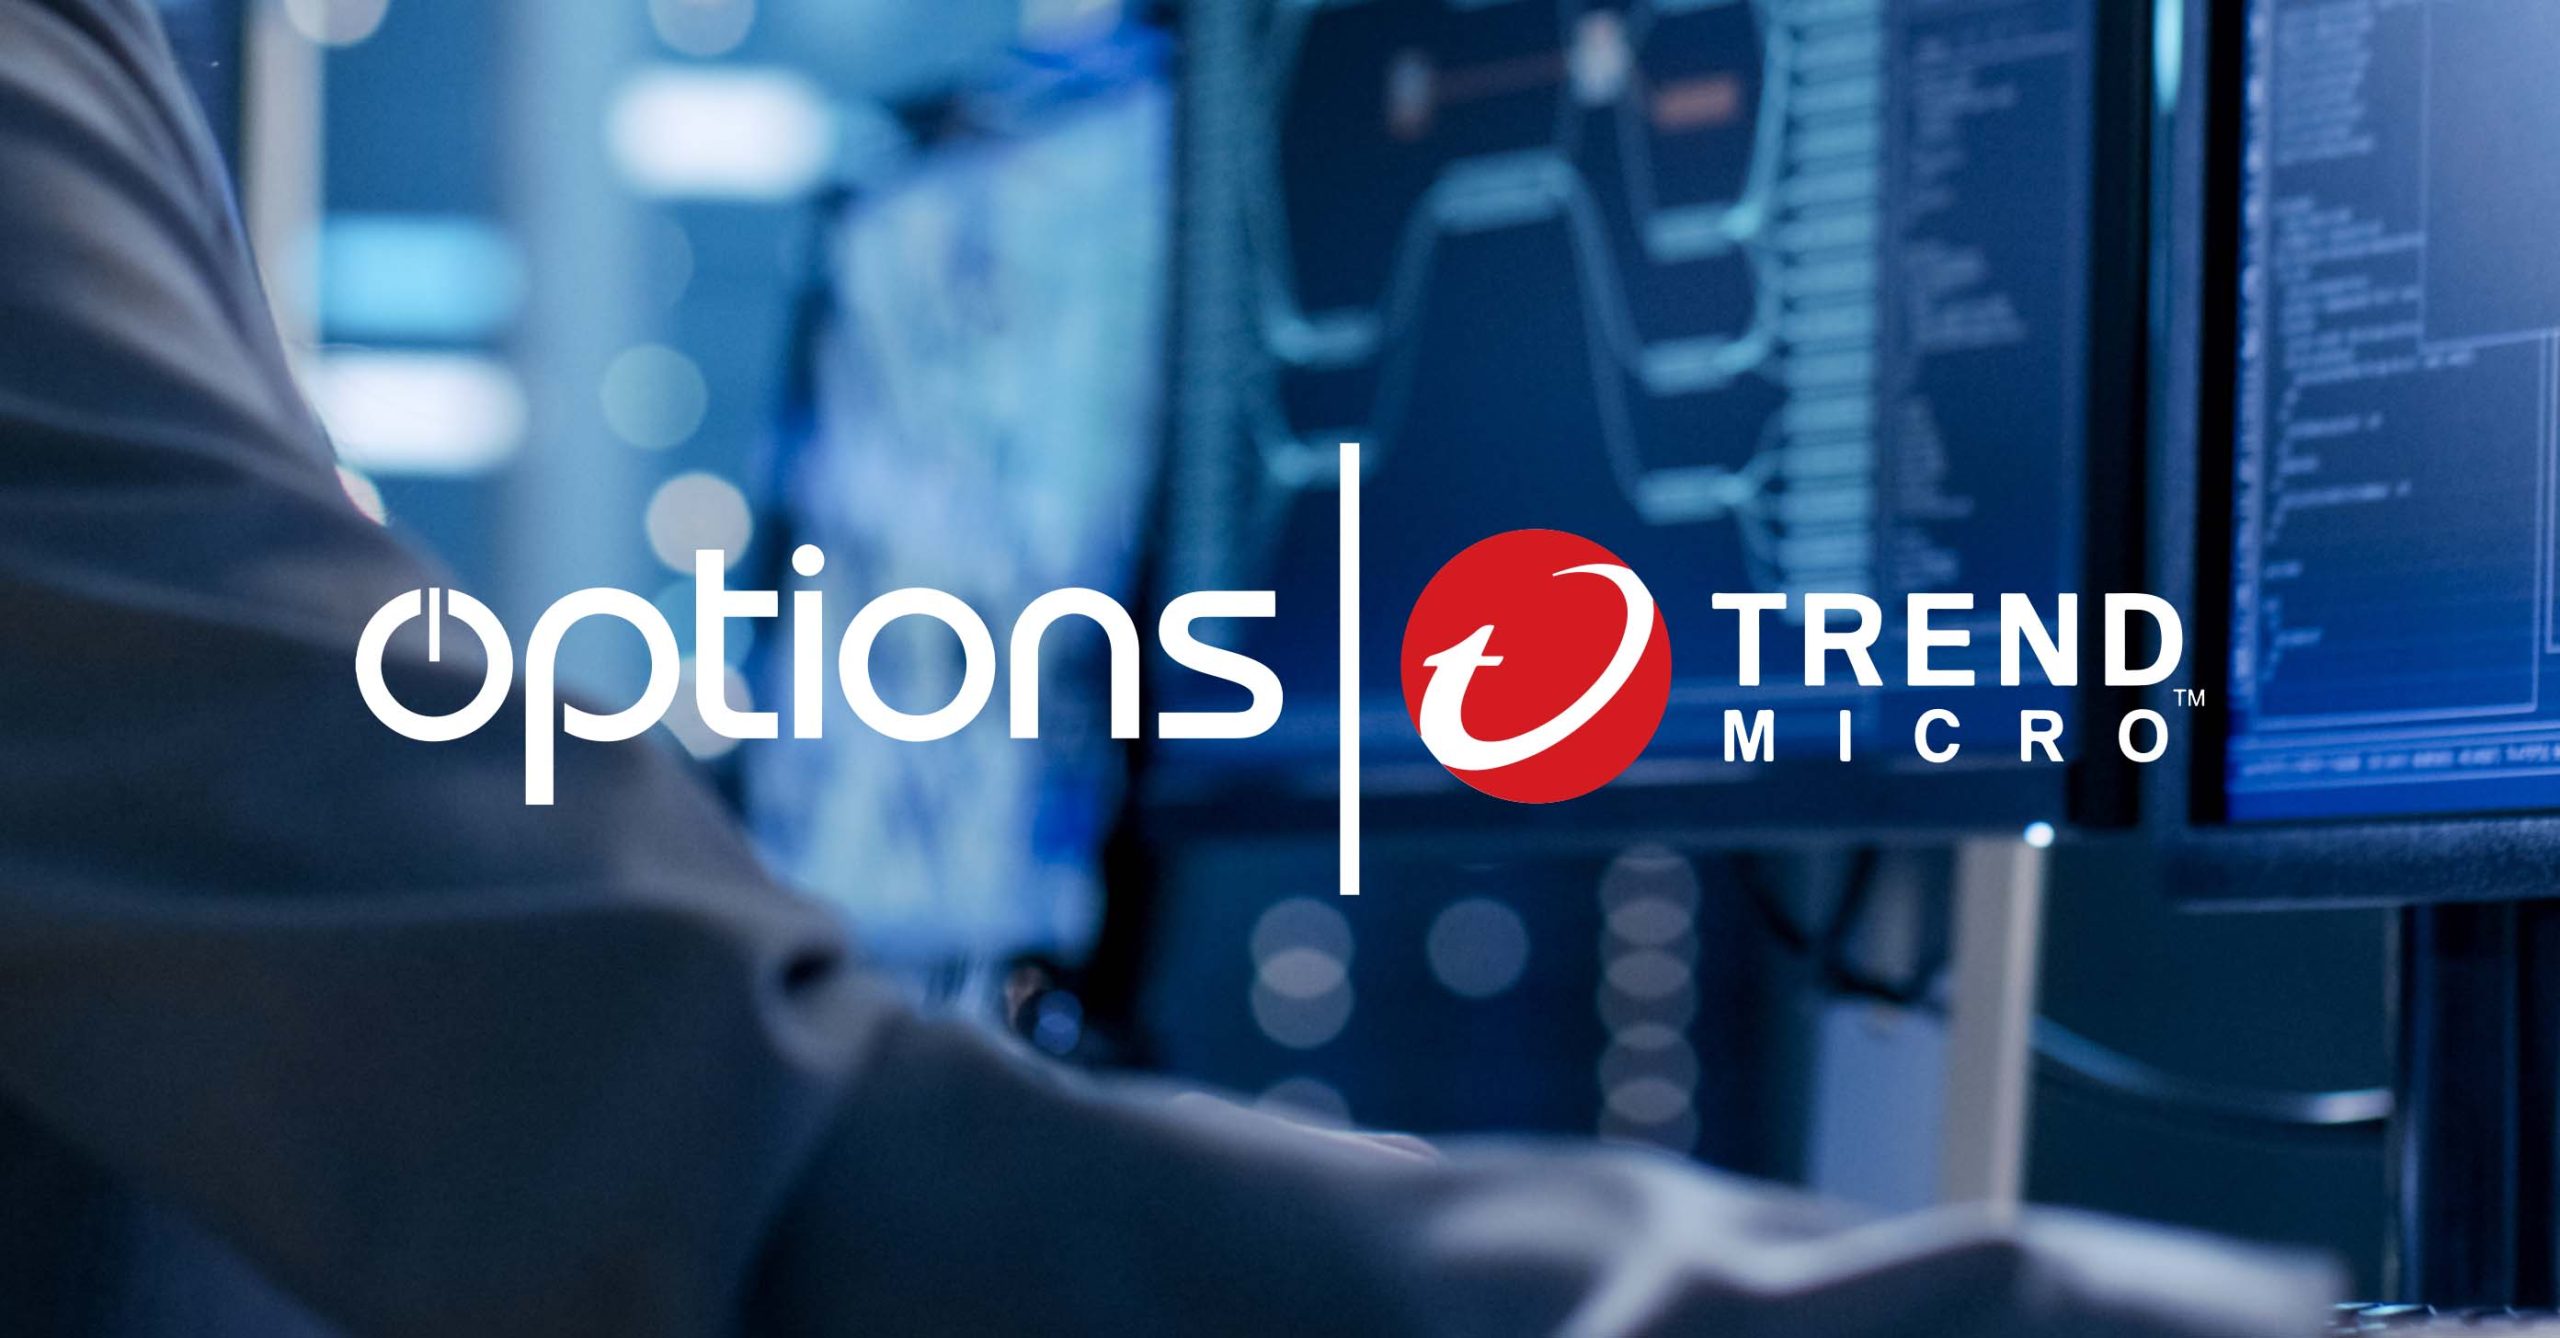 You are currently viewing <strong>Options Recognised as Managed Services Provider Partner of the Year in Trend Micro Awards</strong>